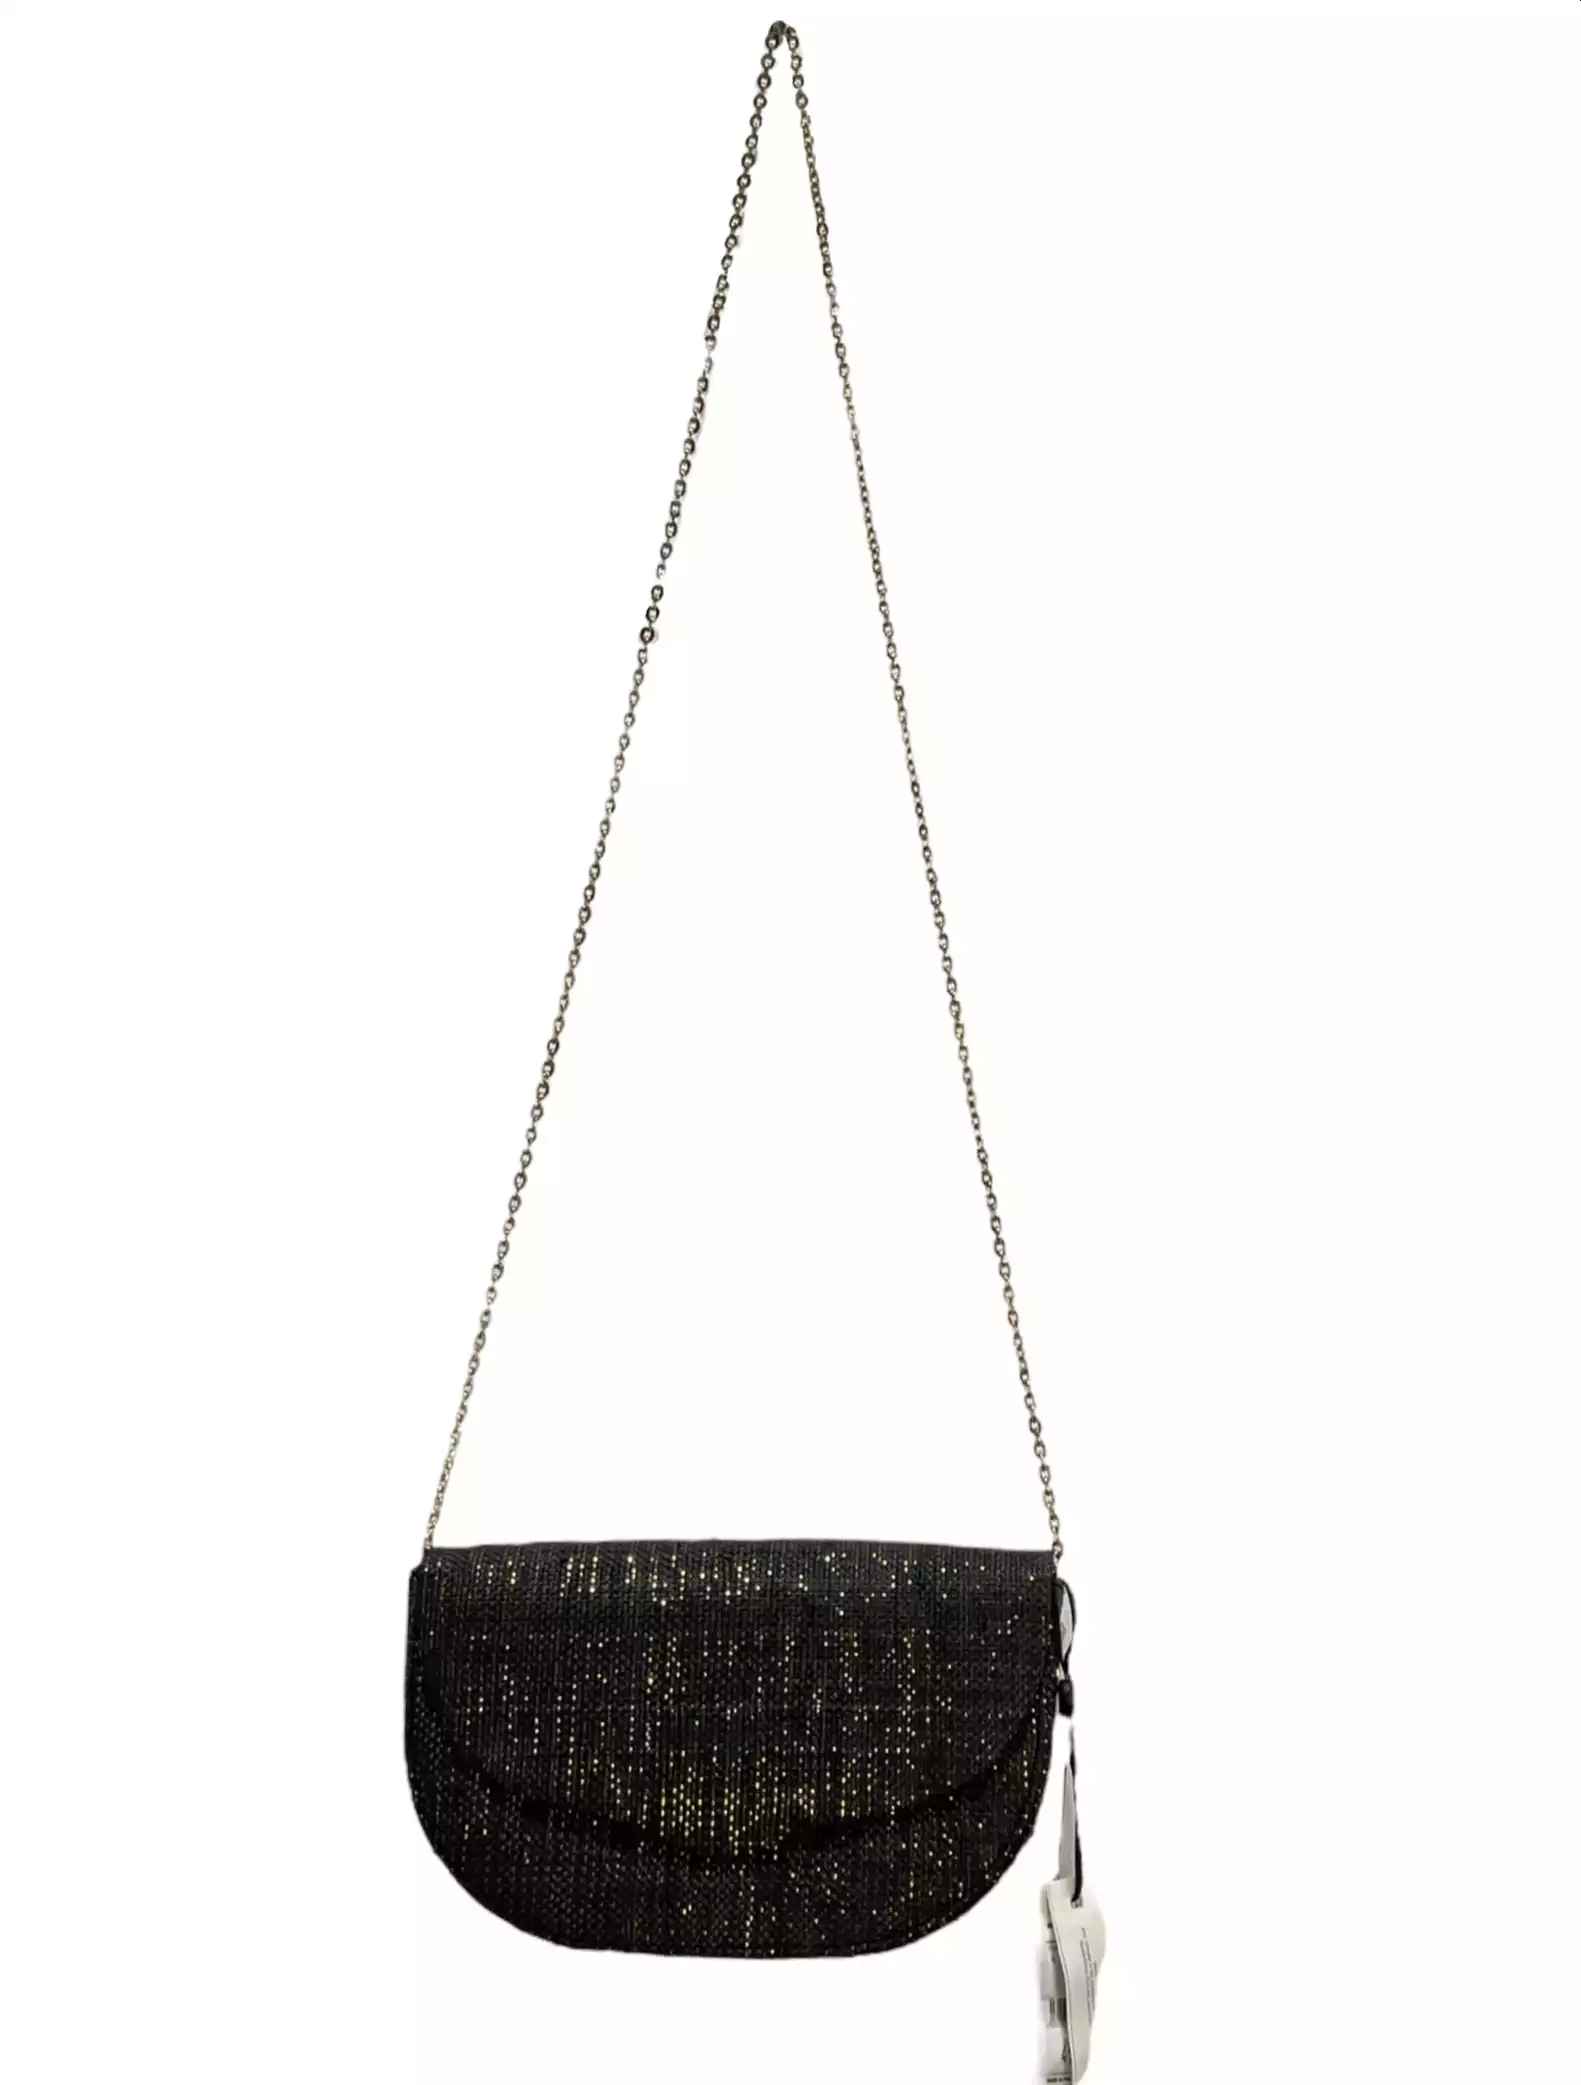 Sling bag by Intropia